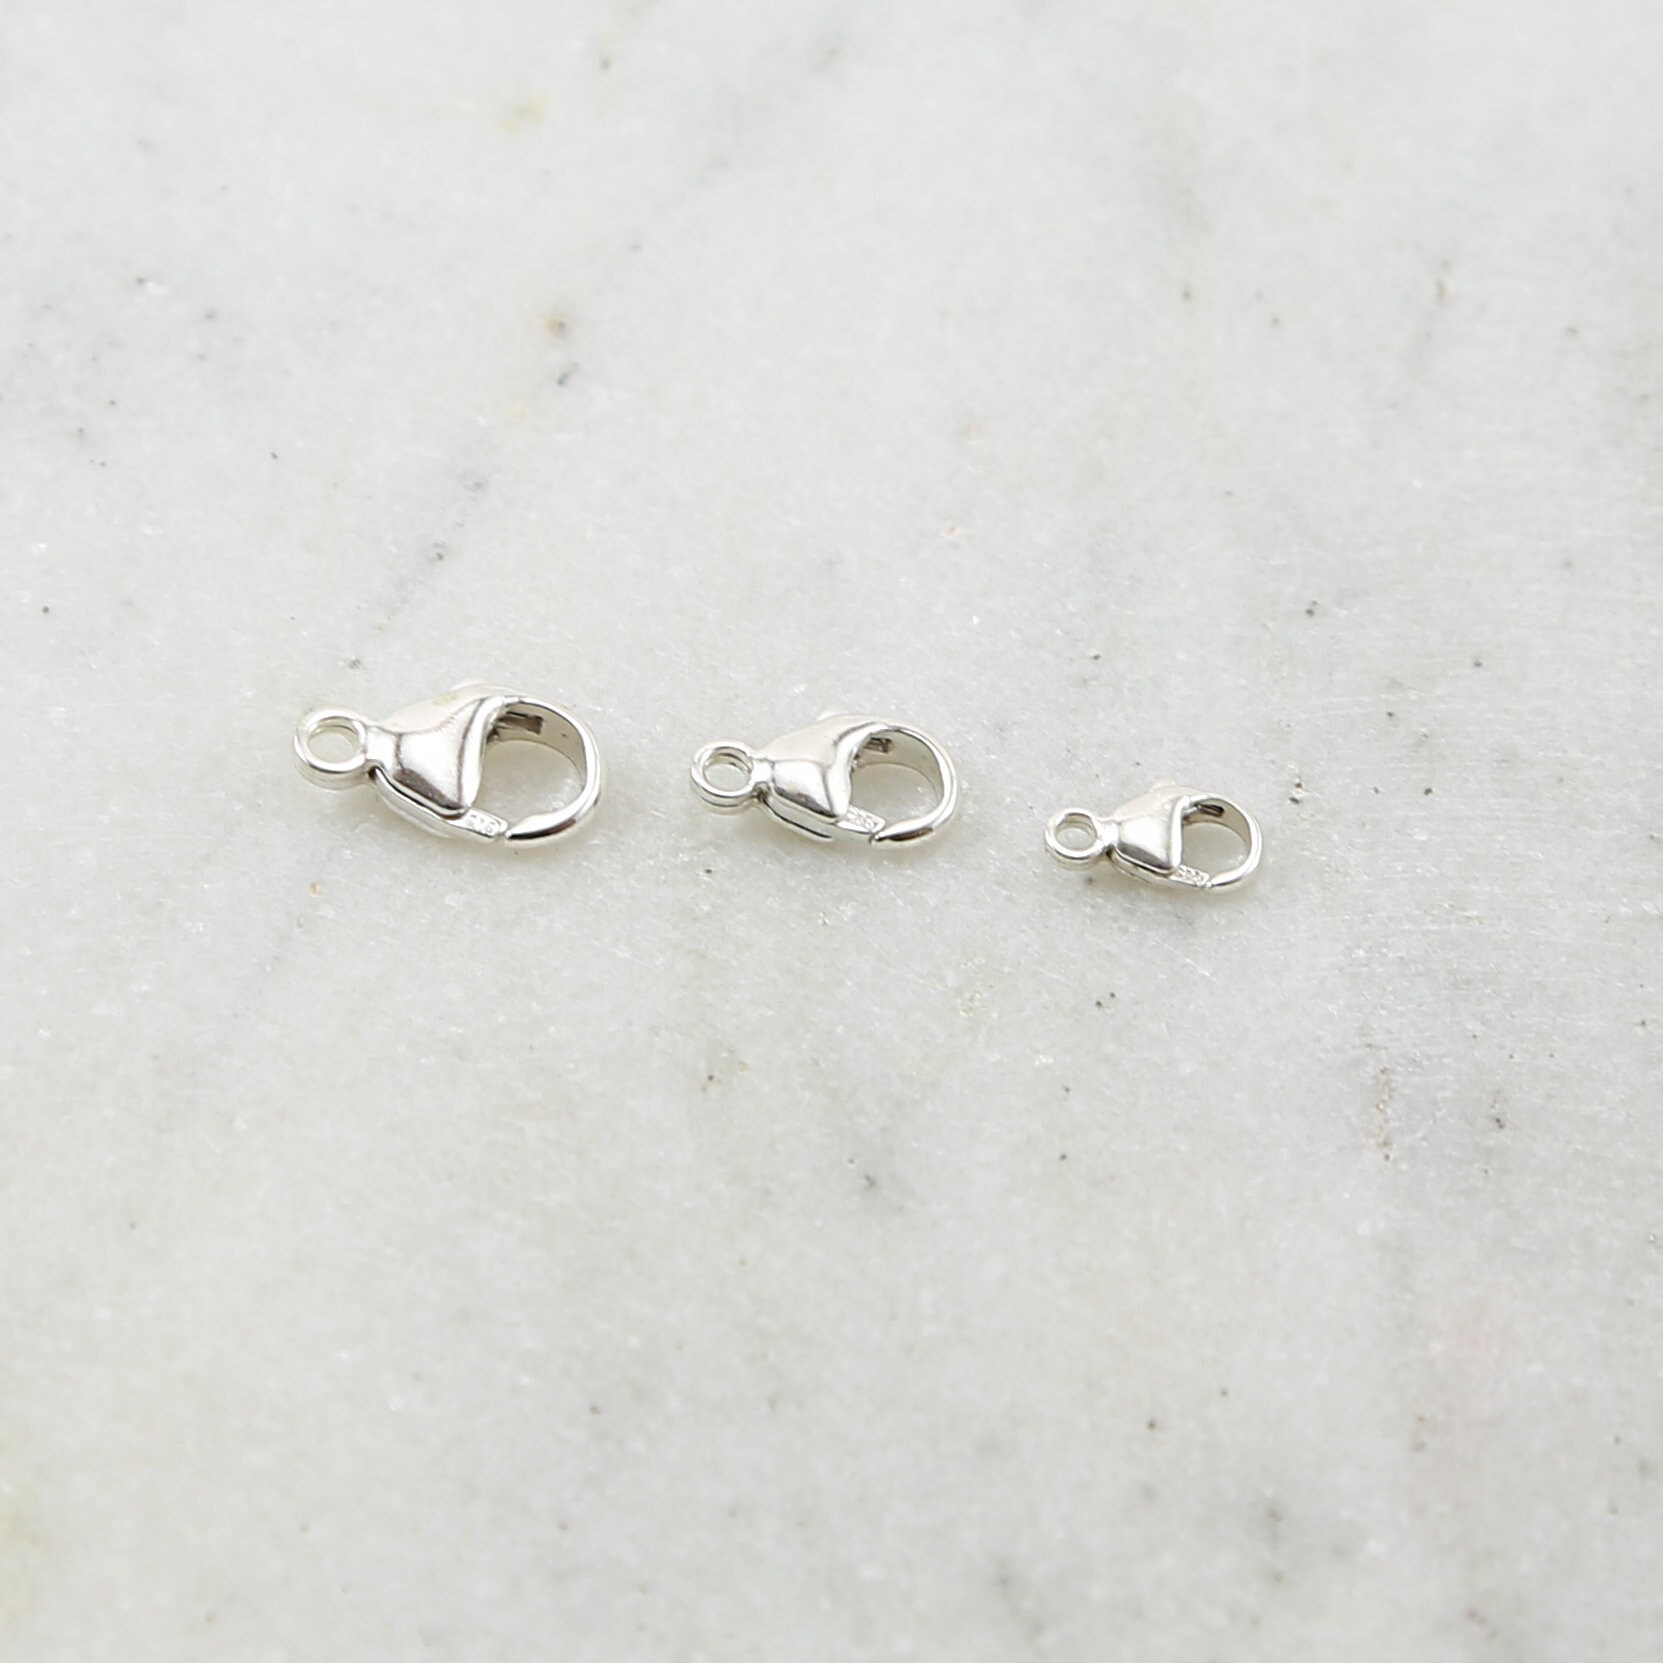 Wholesale Rounded Lobster Claw Clasps Sterling Silver .925